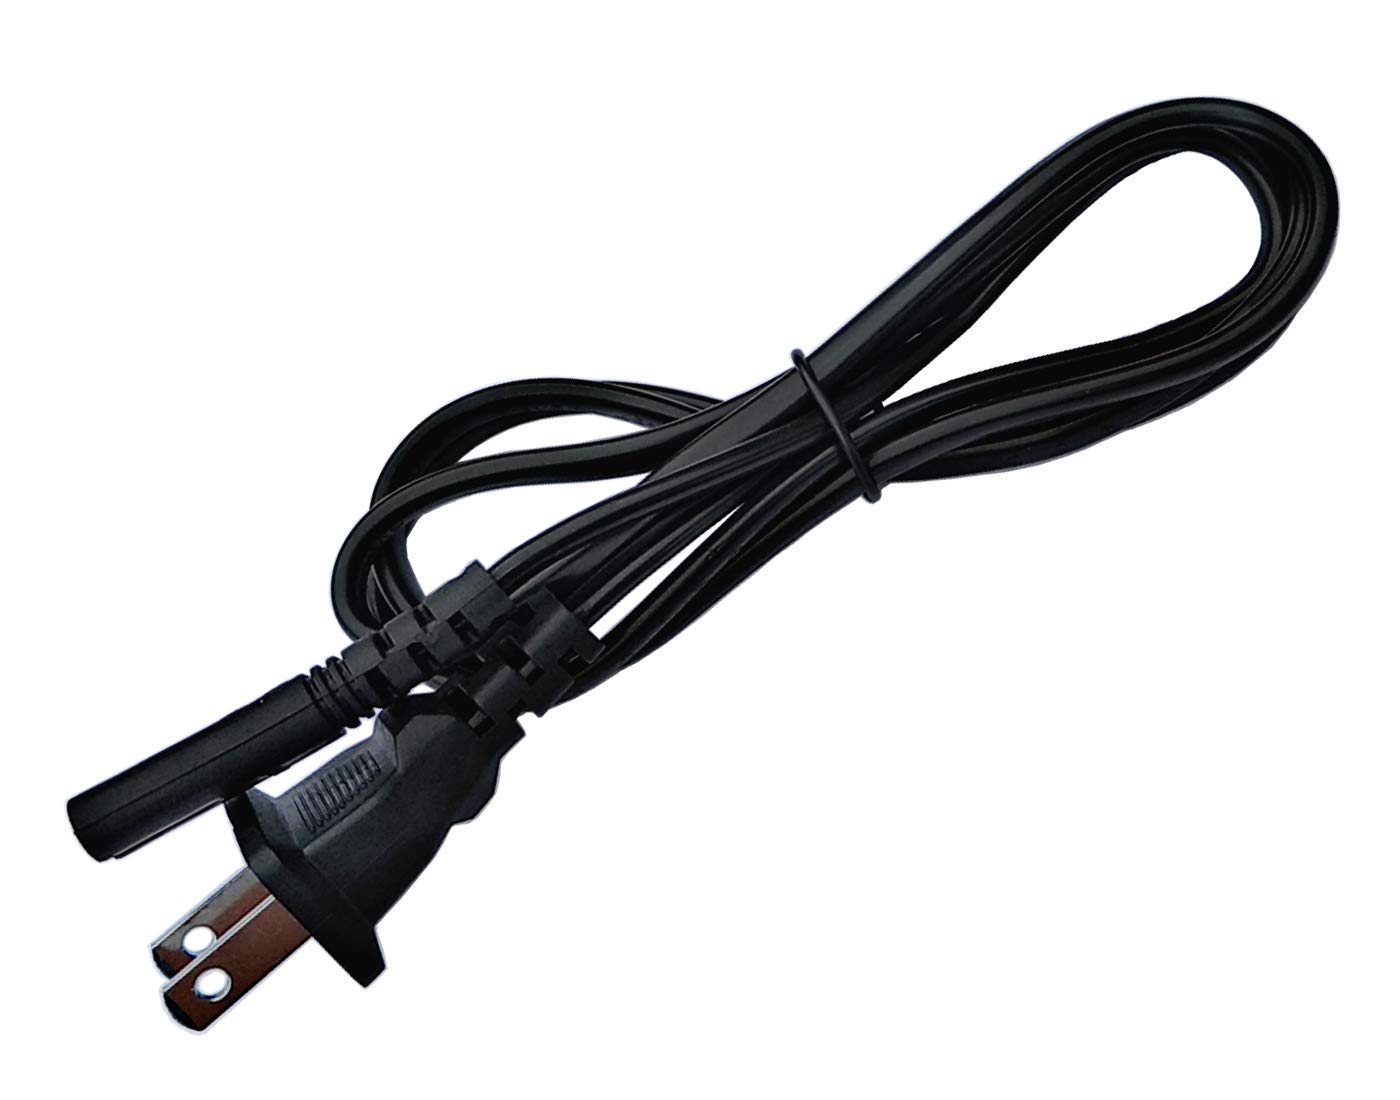 UpBright AC In Power Cord Cable Compatible with Pyle Audio PMBSPG40 PSUFM1043BT PYLE-PRO PSUFM1235BT BoomBox Speaker Meirende MR-108 Karaoke PA PSBV600BT PSBV630HDBT PWMA170 PWMA850UFM PWMAB2 PWMAB250